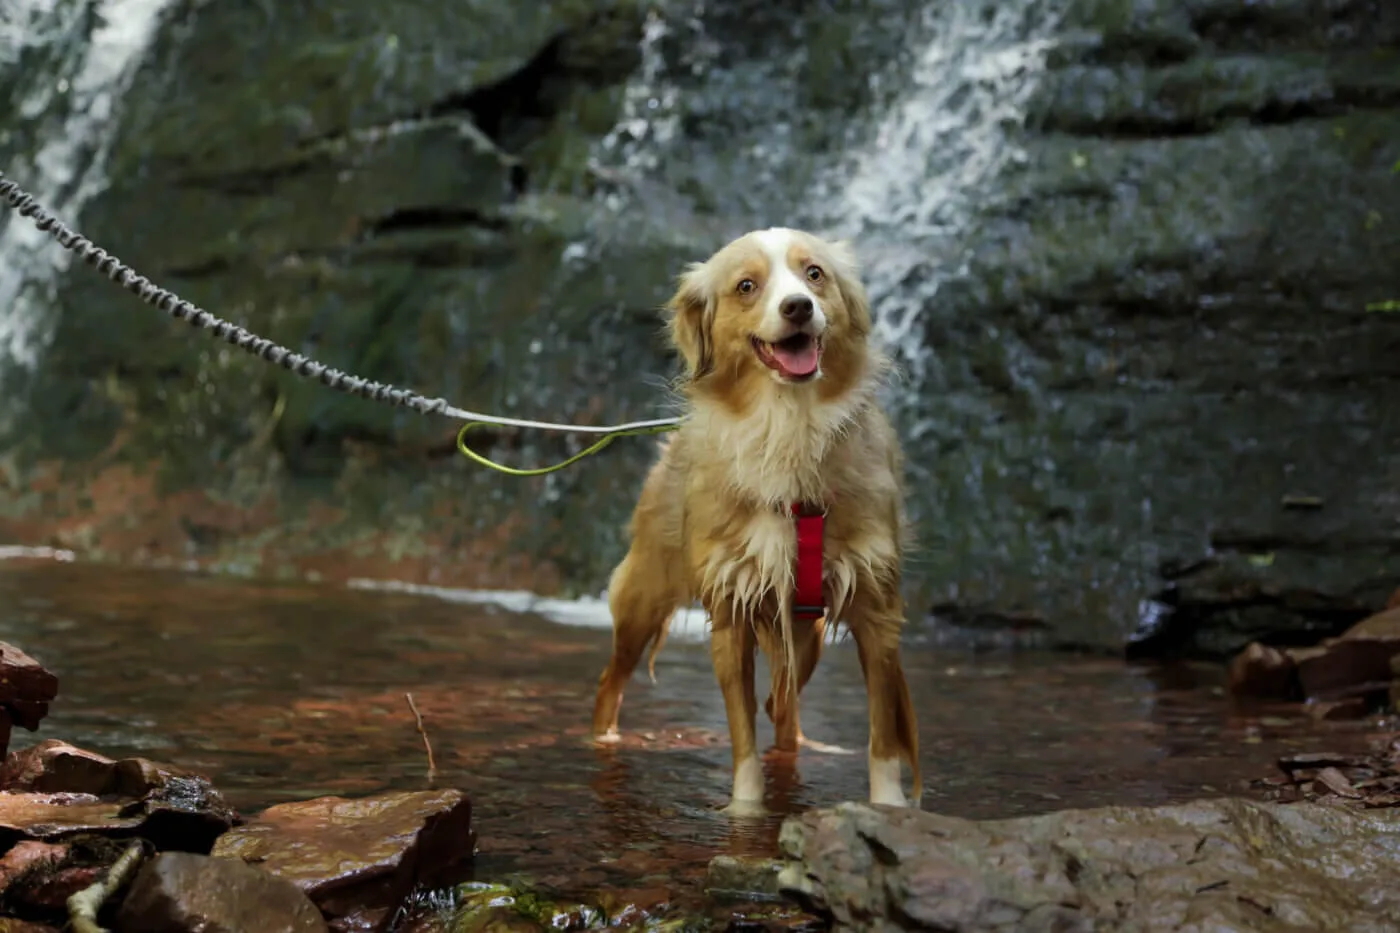 8 Dog-Friendly Pennsylvania Beaches That Will Give Your Pooch the Zoomies